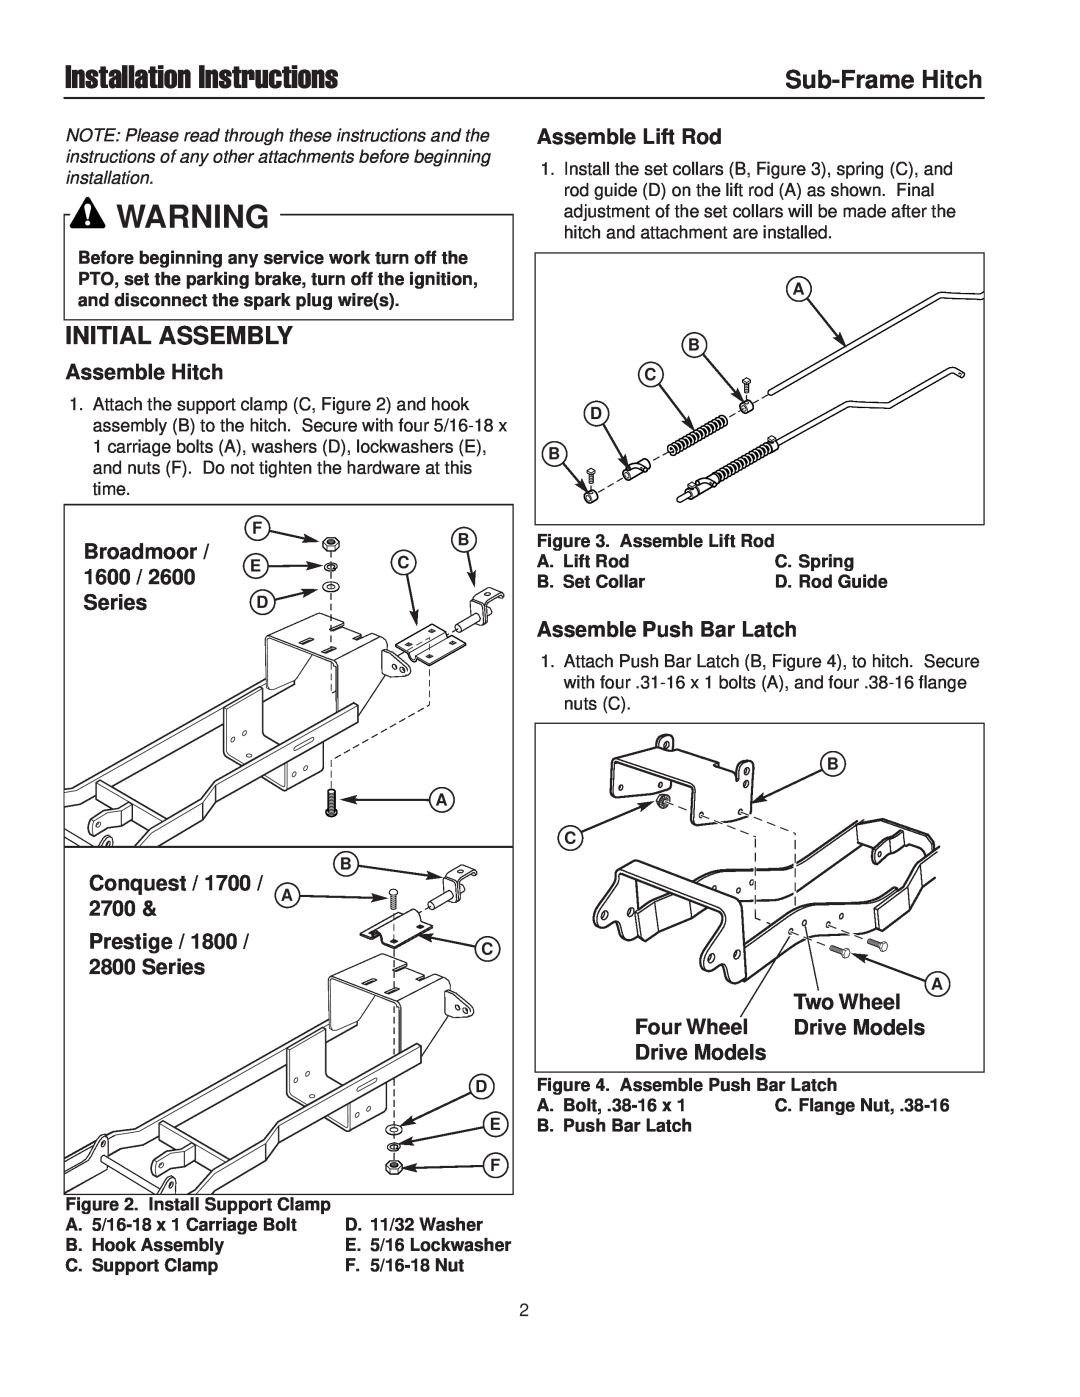 Snapper 1695195 installation instructions Installation Instructions, Initial Assembly, Sub-Frame Hitch 